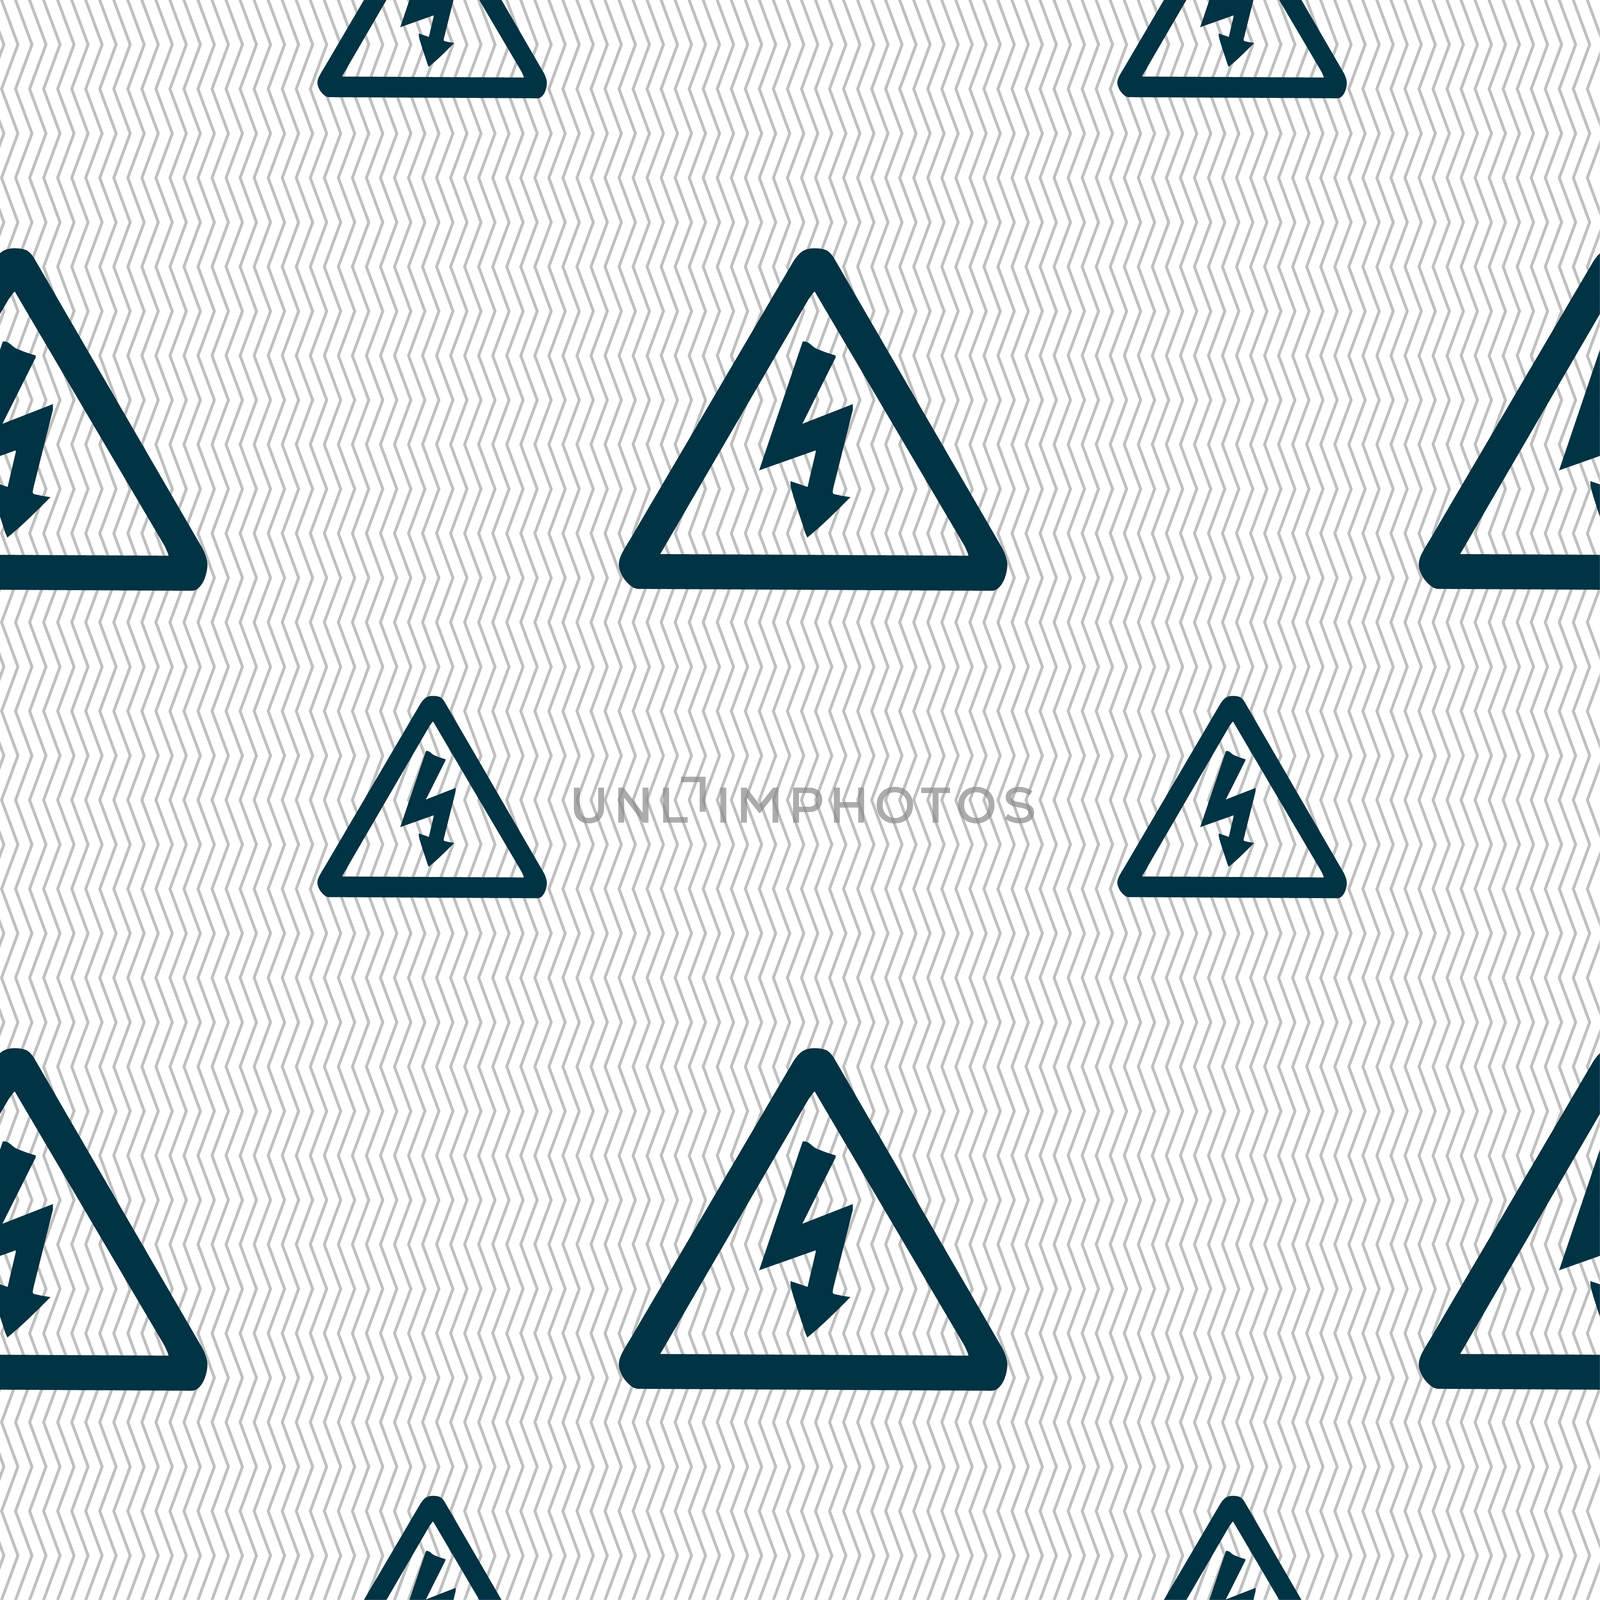 voltage icon sign. Seamless pattern with geometric texture. illustration